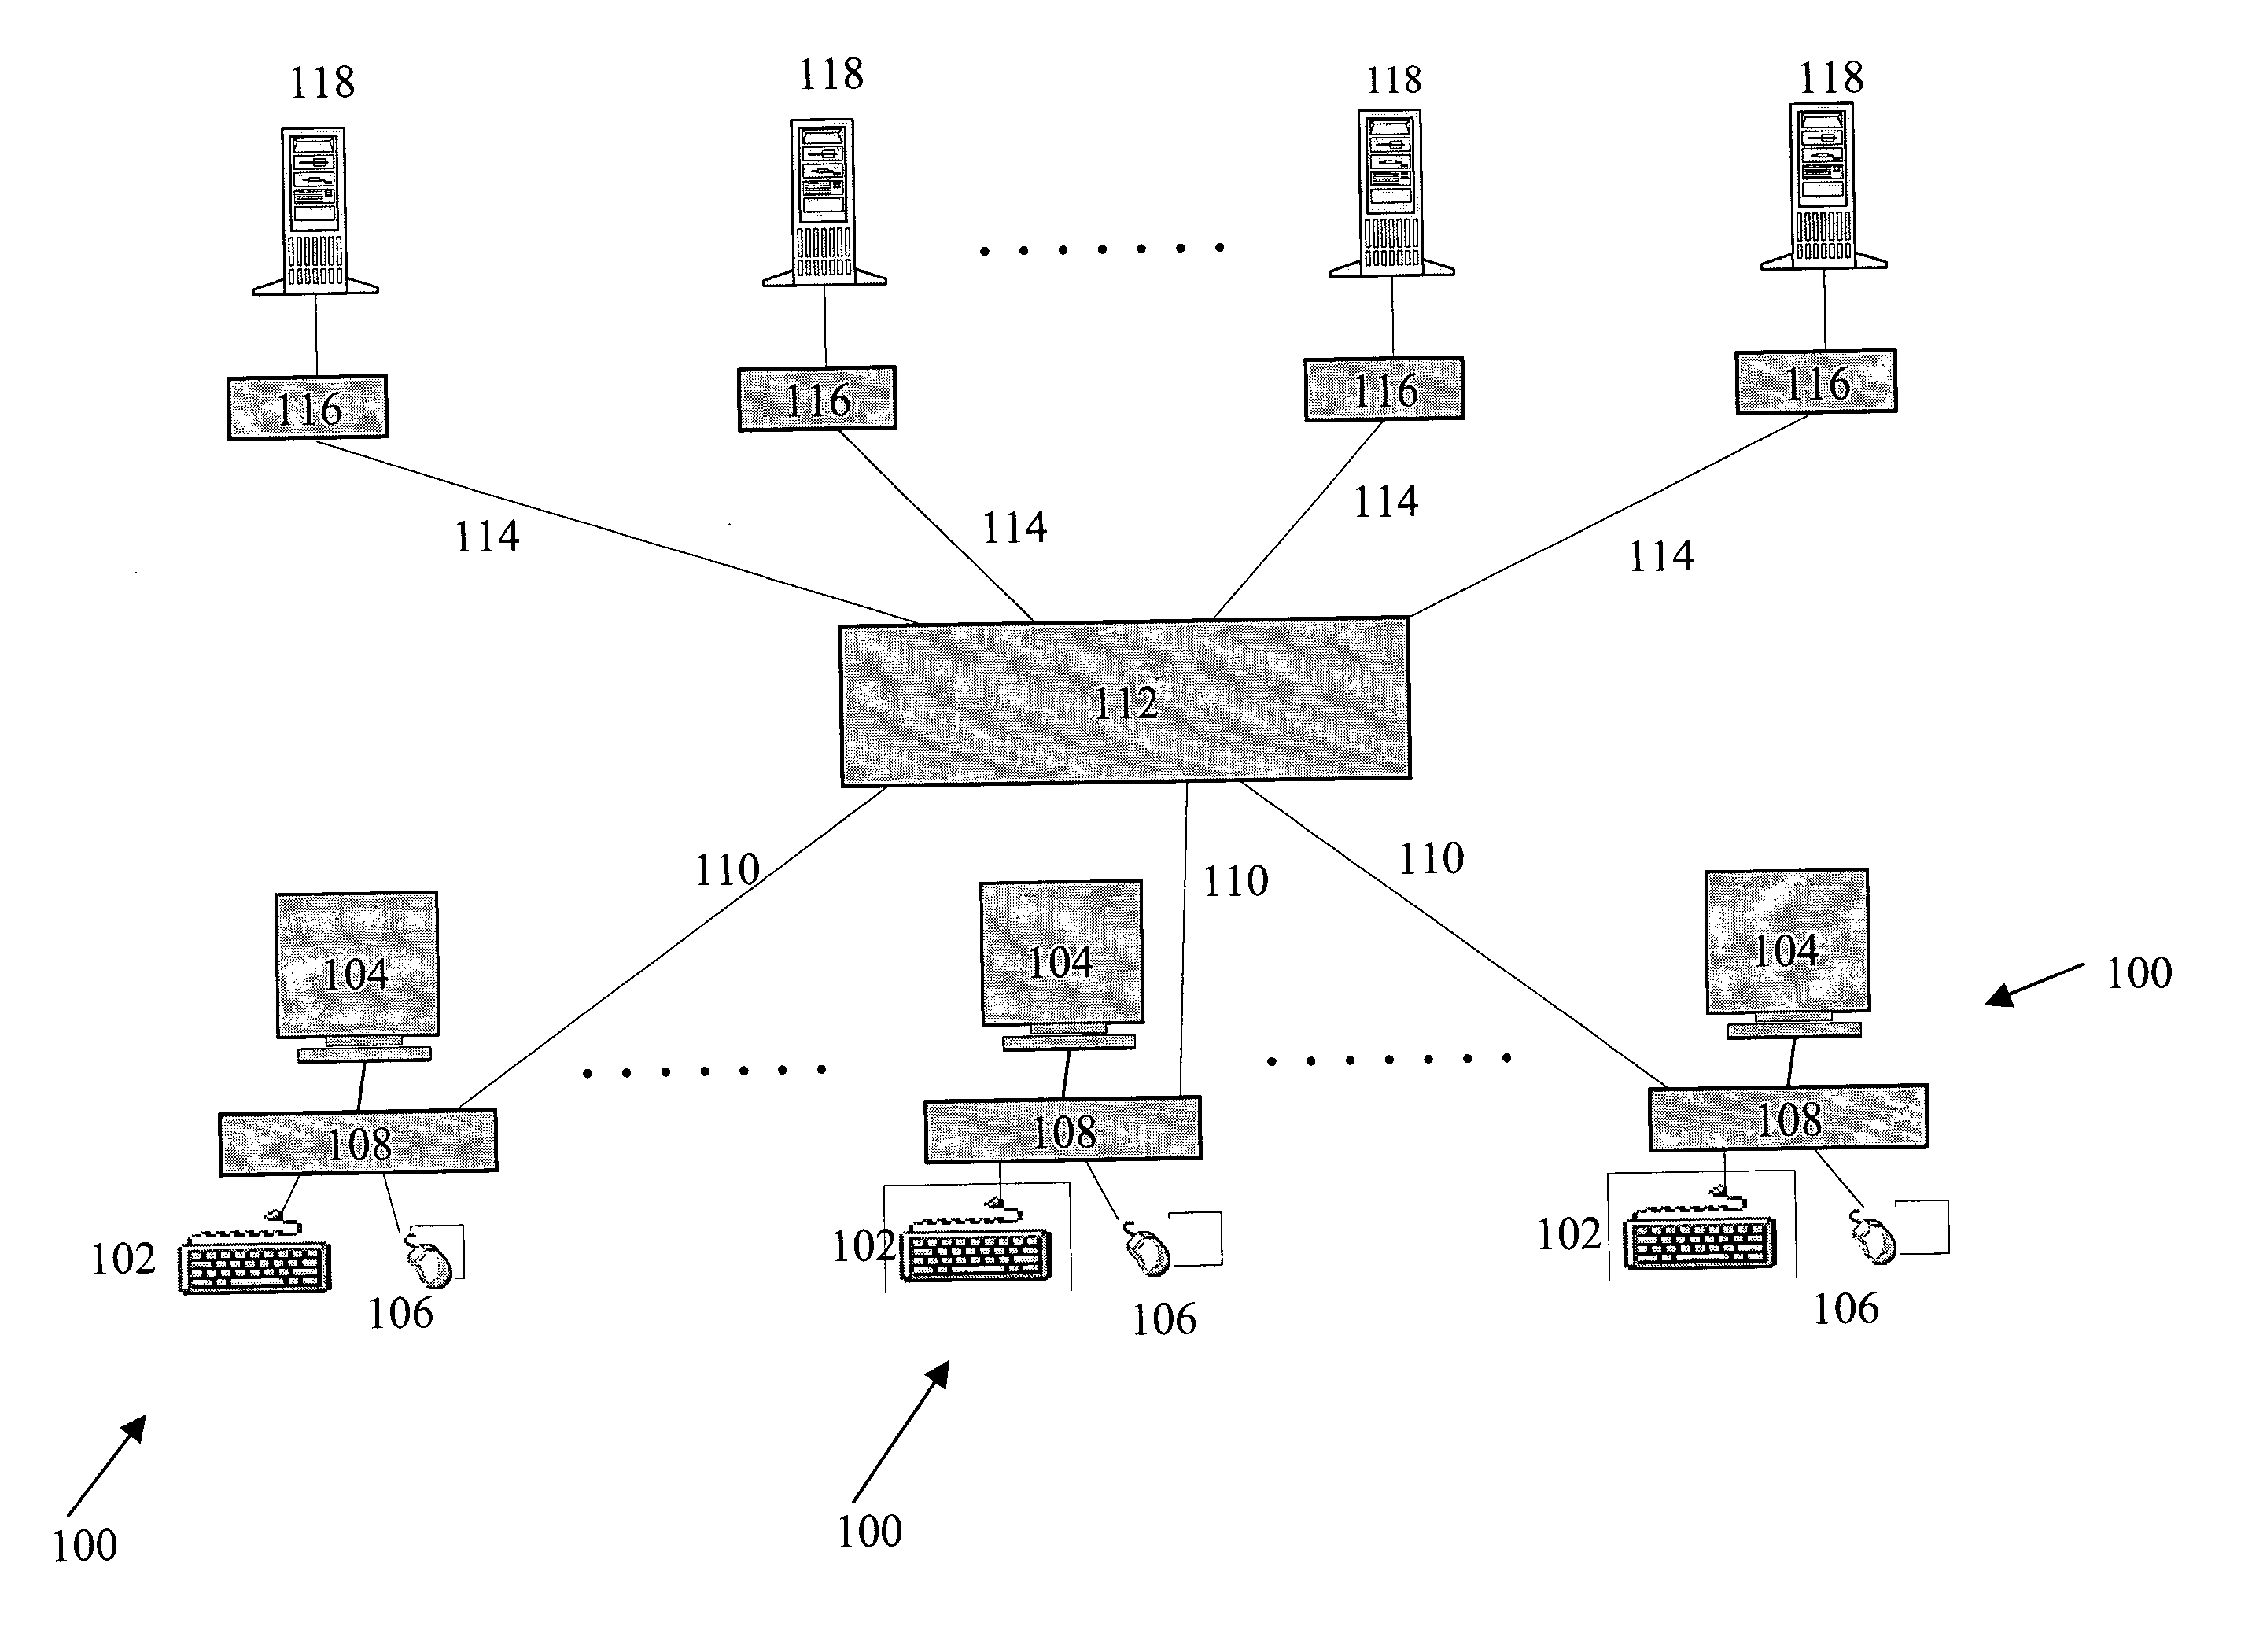 Intelligent modular server management system for selectively operating and locating a plurality of computers